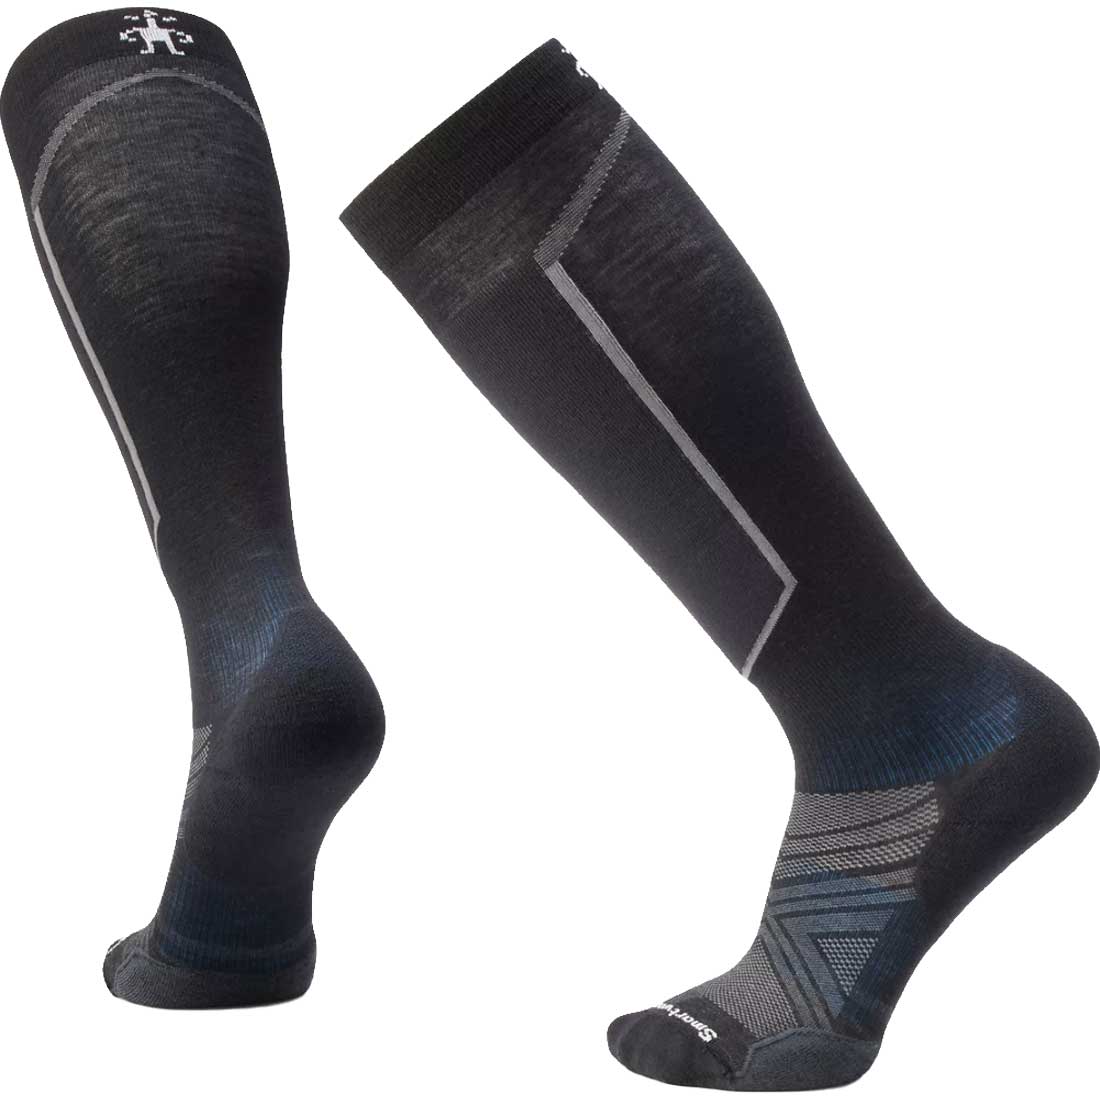 Smartwool Ski Targeted Cushion Extra Stretch Over-the-Calf Sock - Men's